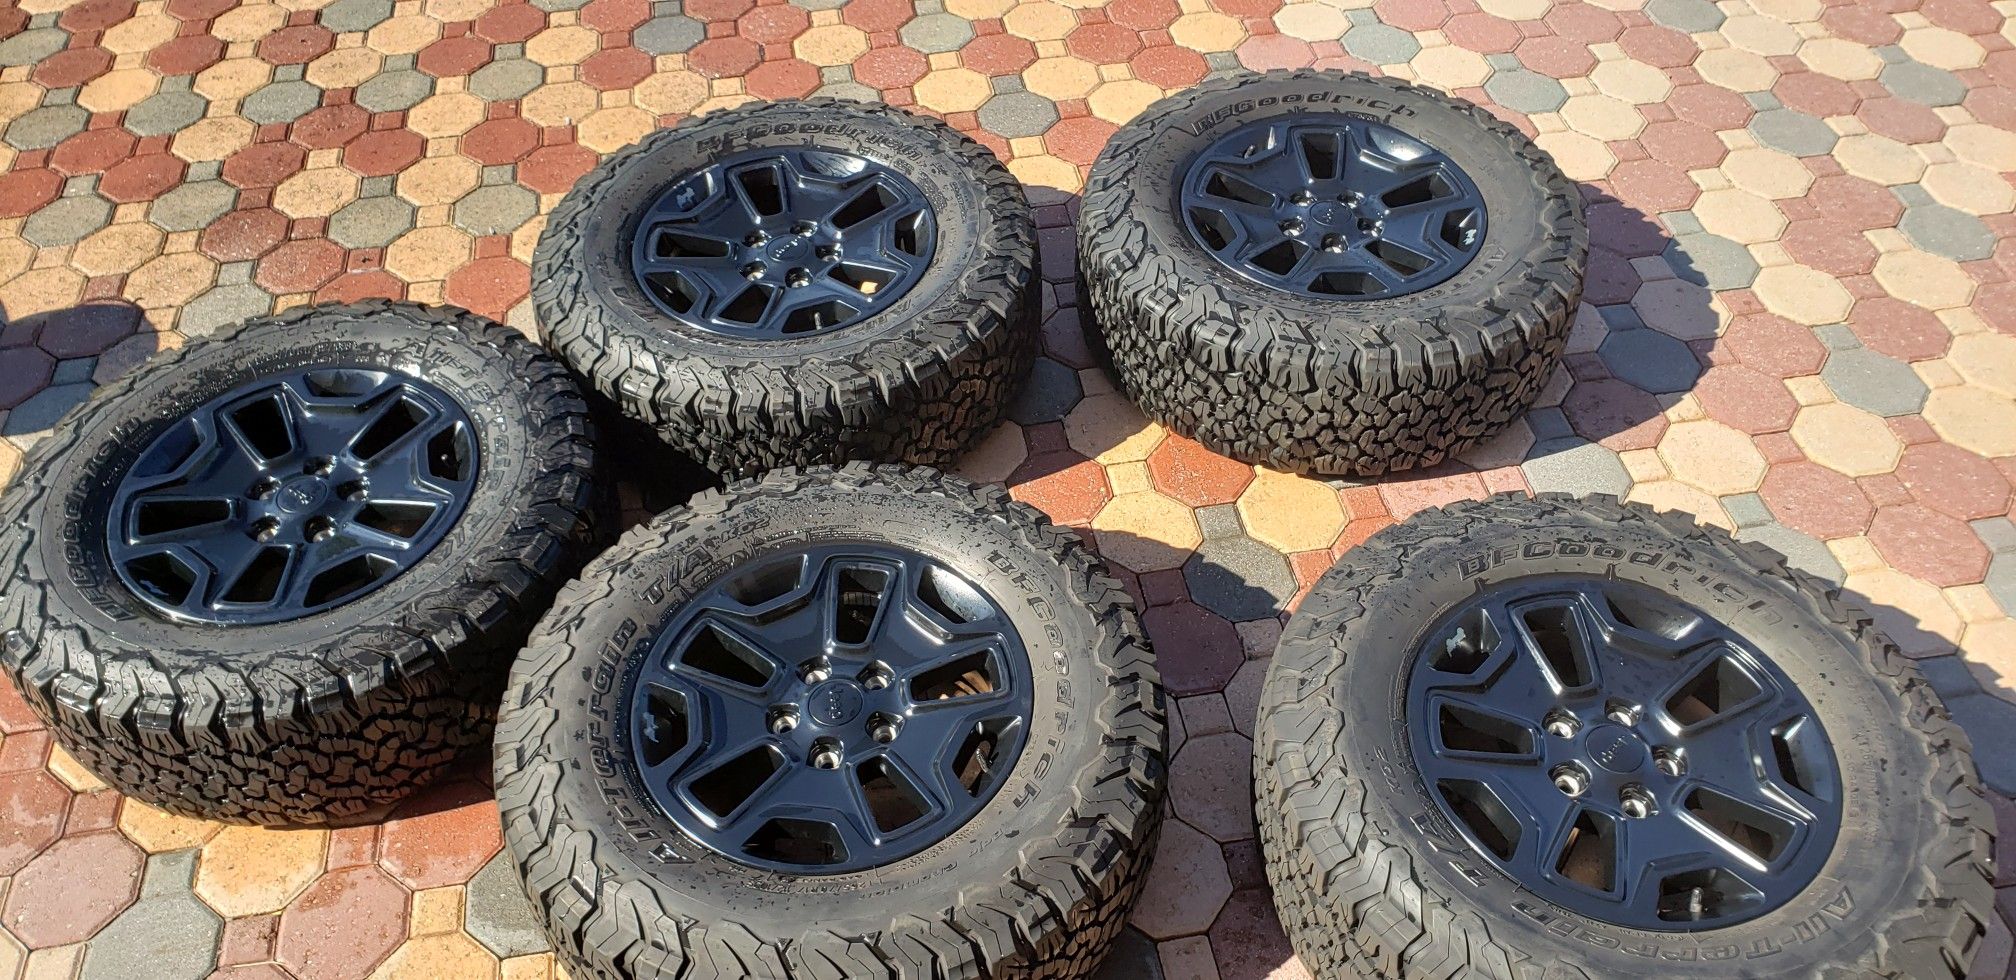 OEM Jeep wheels and tires backcountry edition